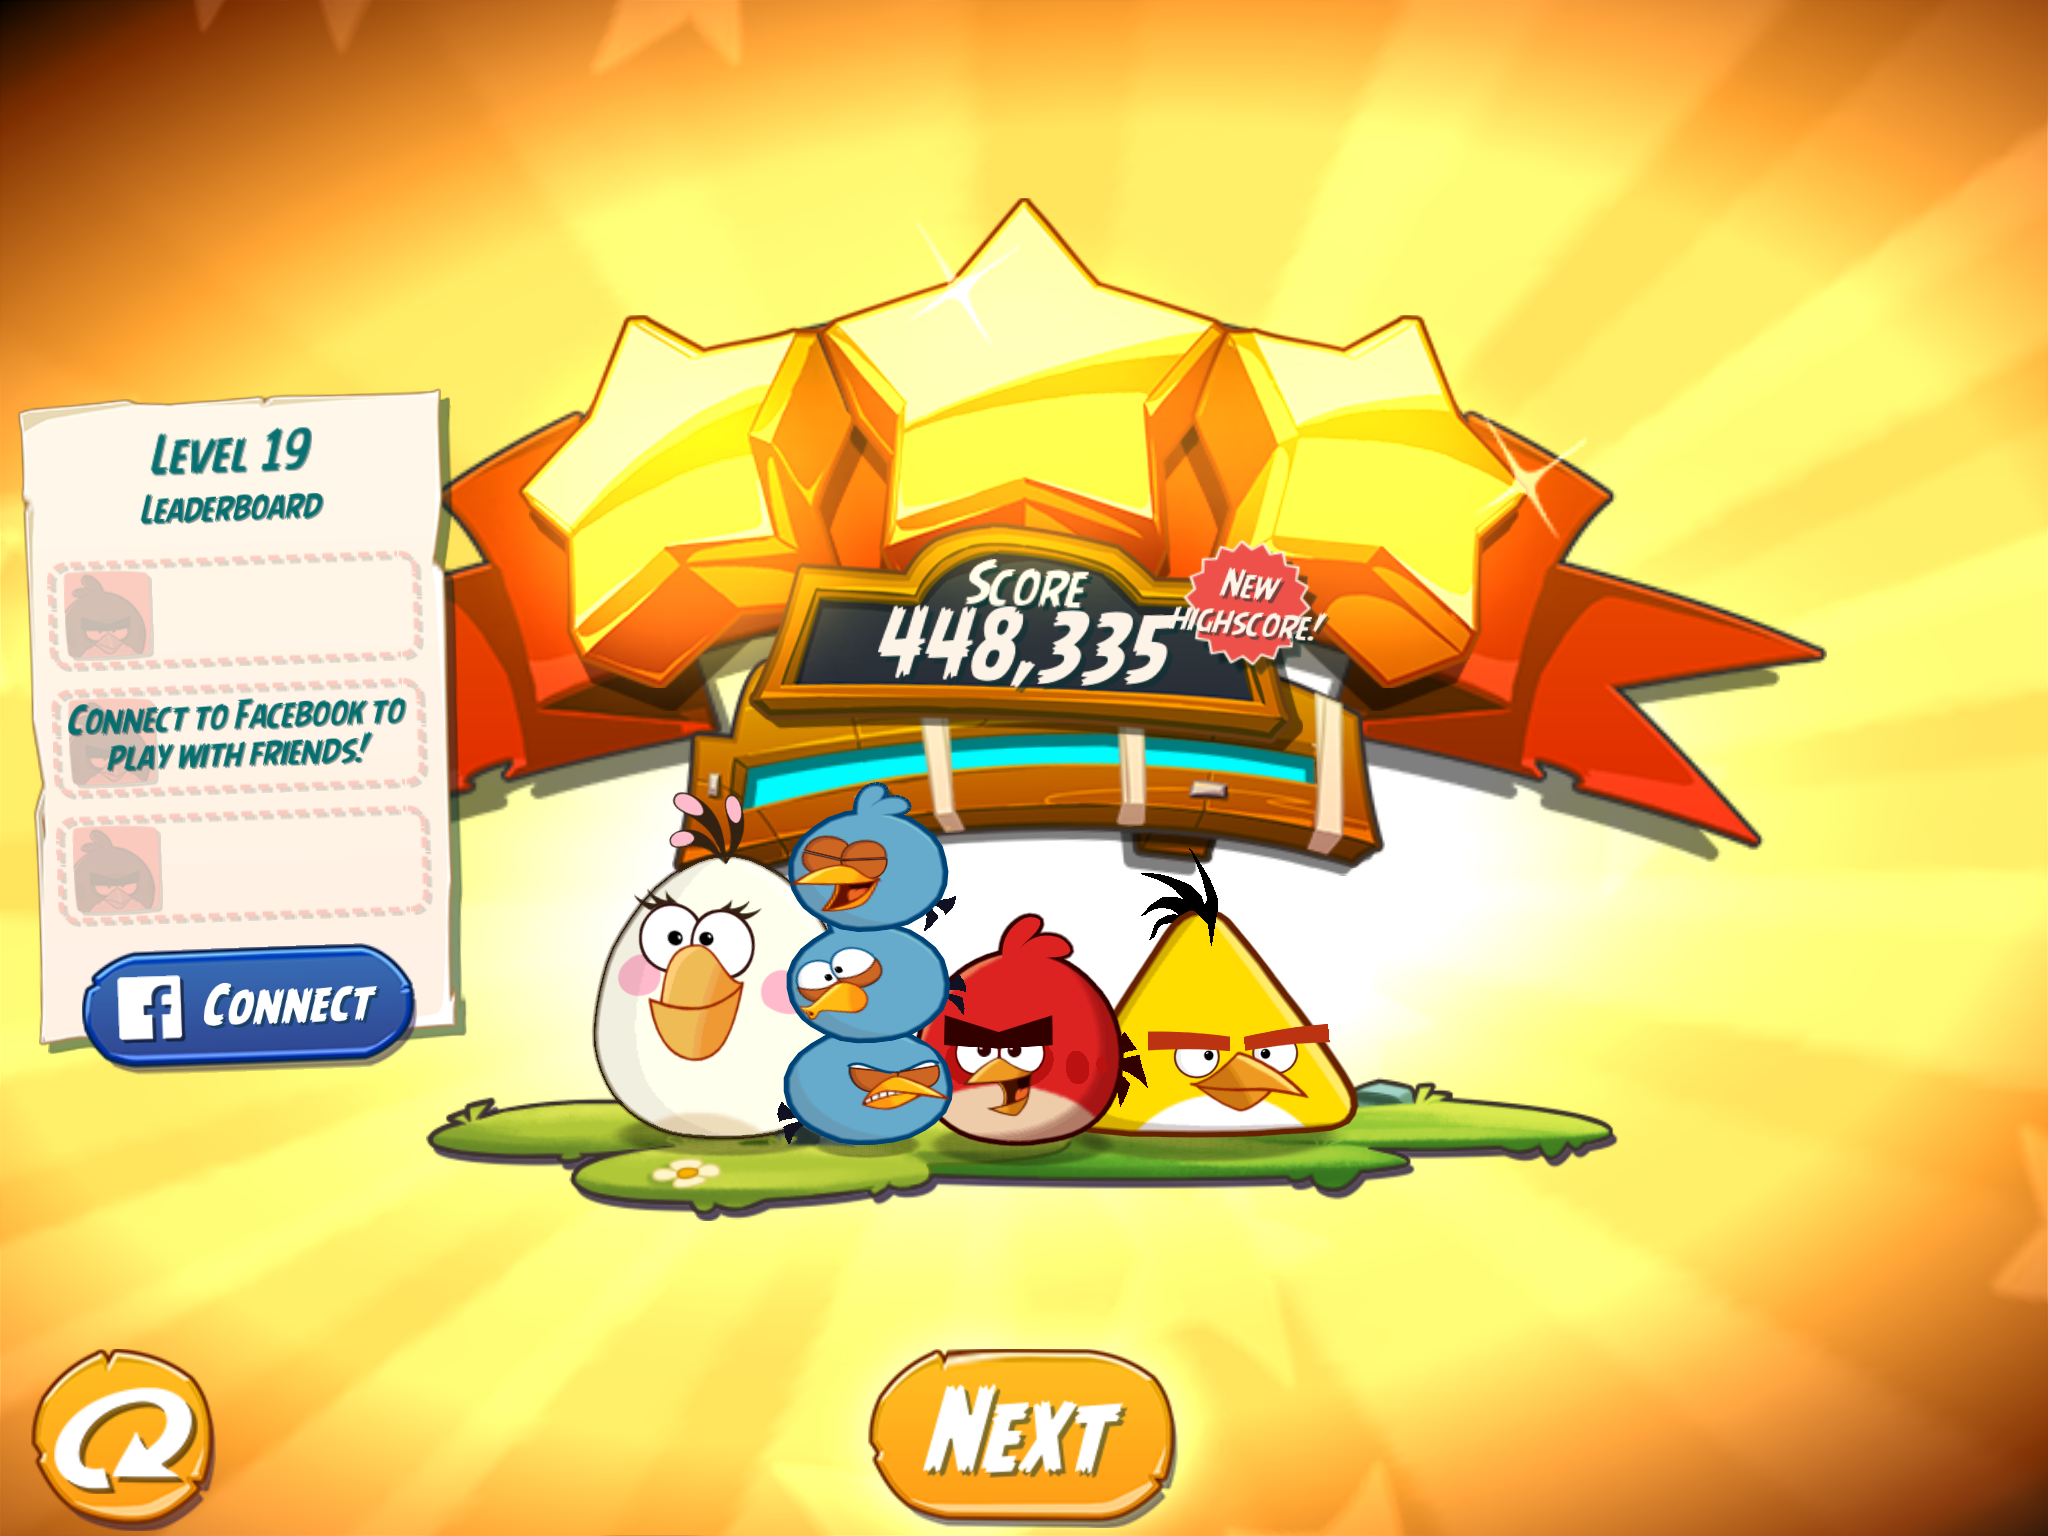 Spindy12: Angry Birds 2: Level 19 (iOS) 448,335 points on 2016-12-20 19:38:26